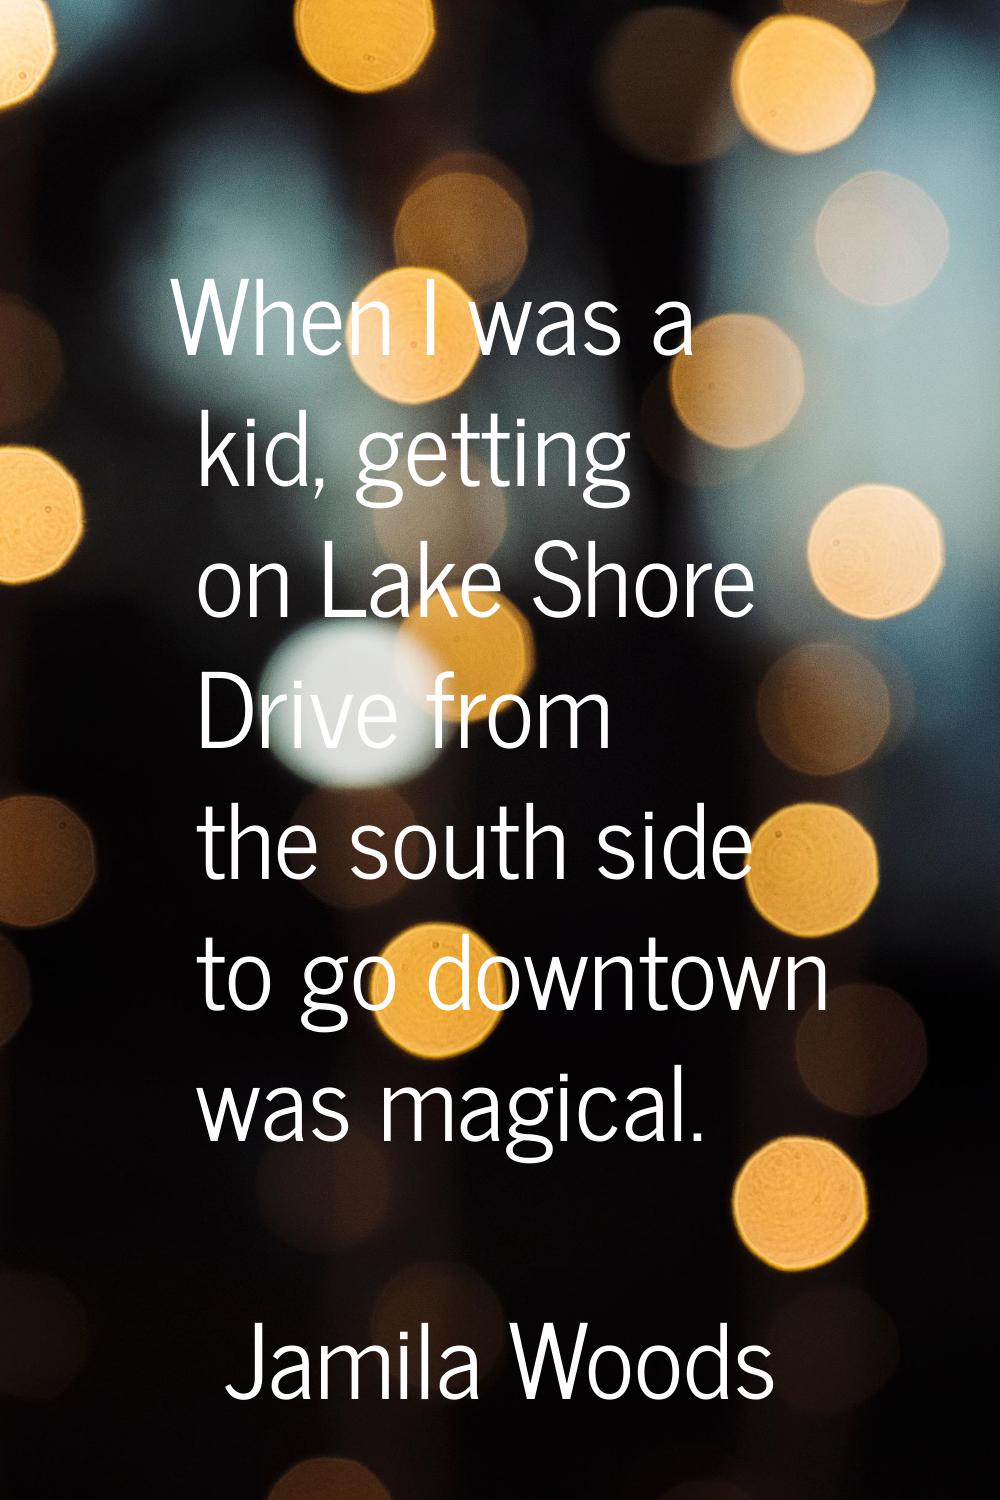 When I was a kid, getting on Lake Shore Drive from the south side to go downtown was magical.